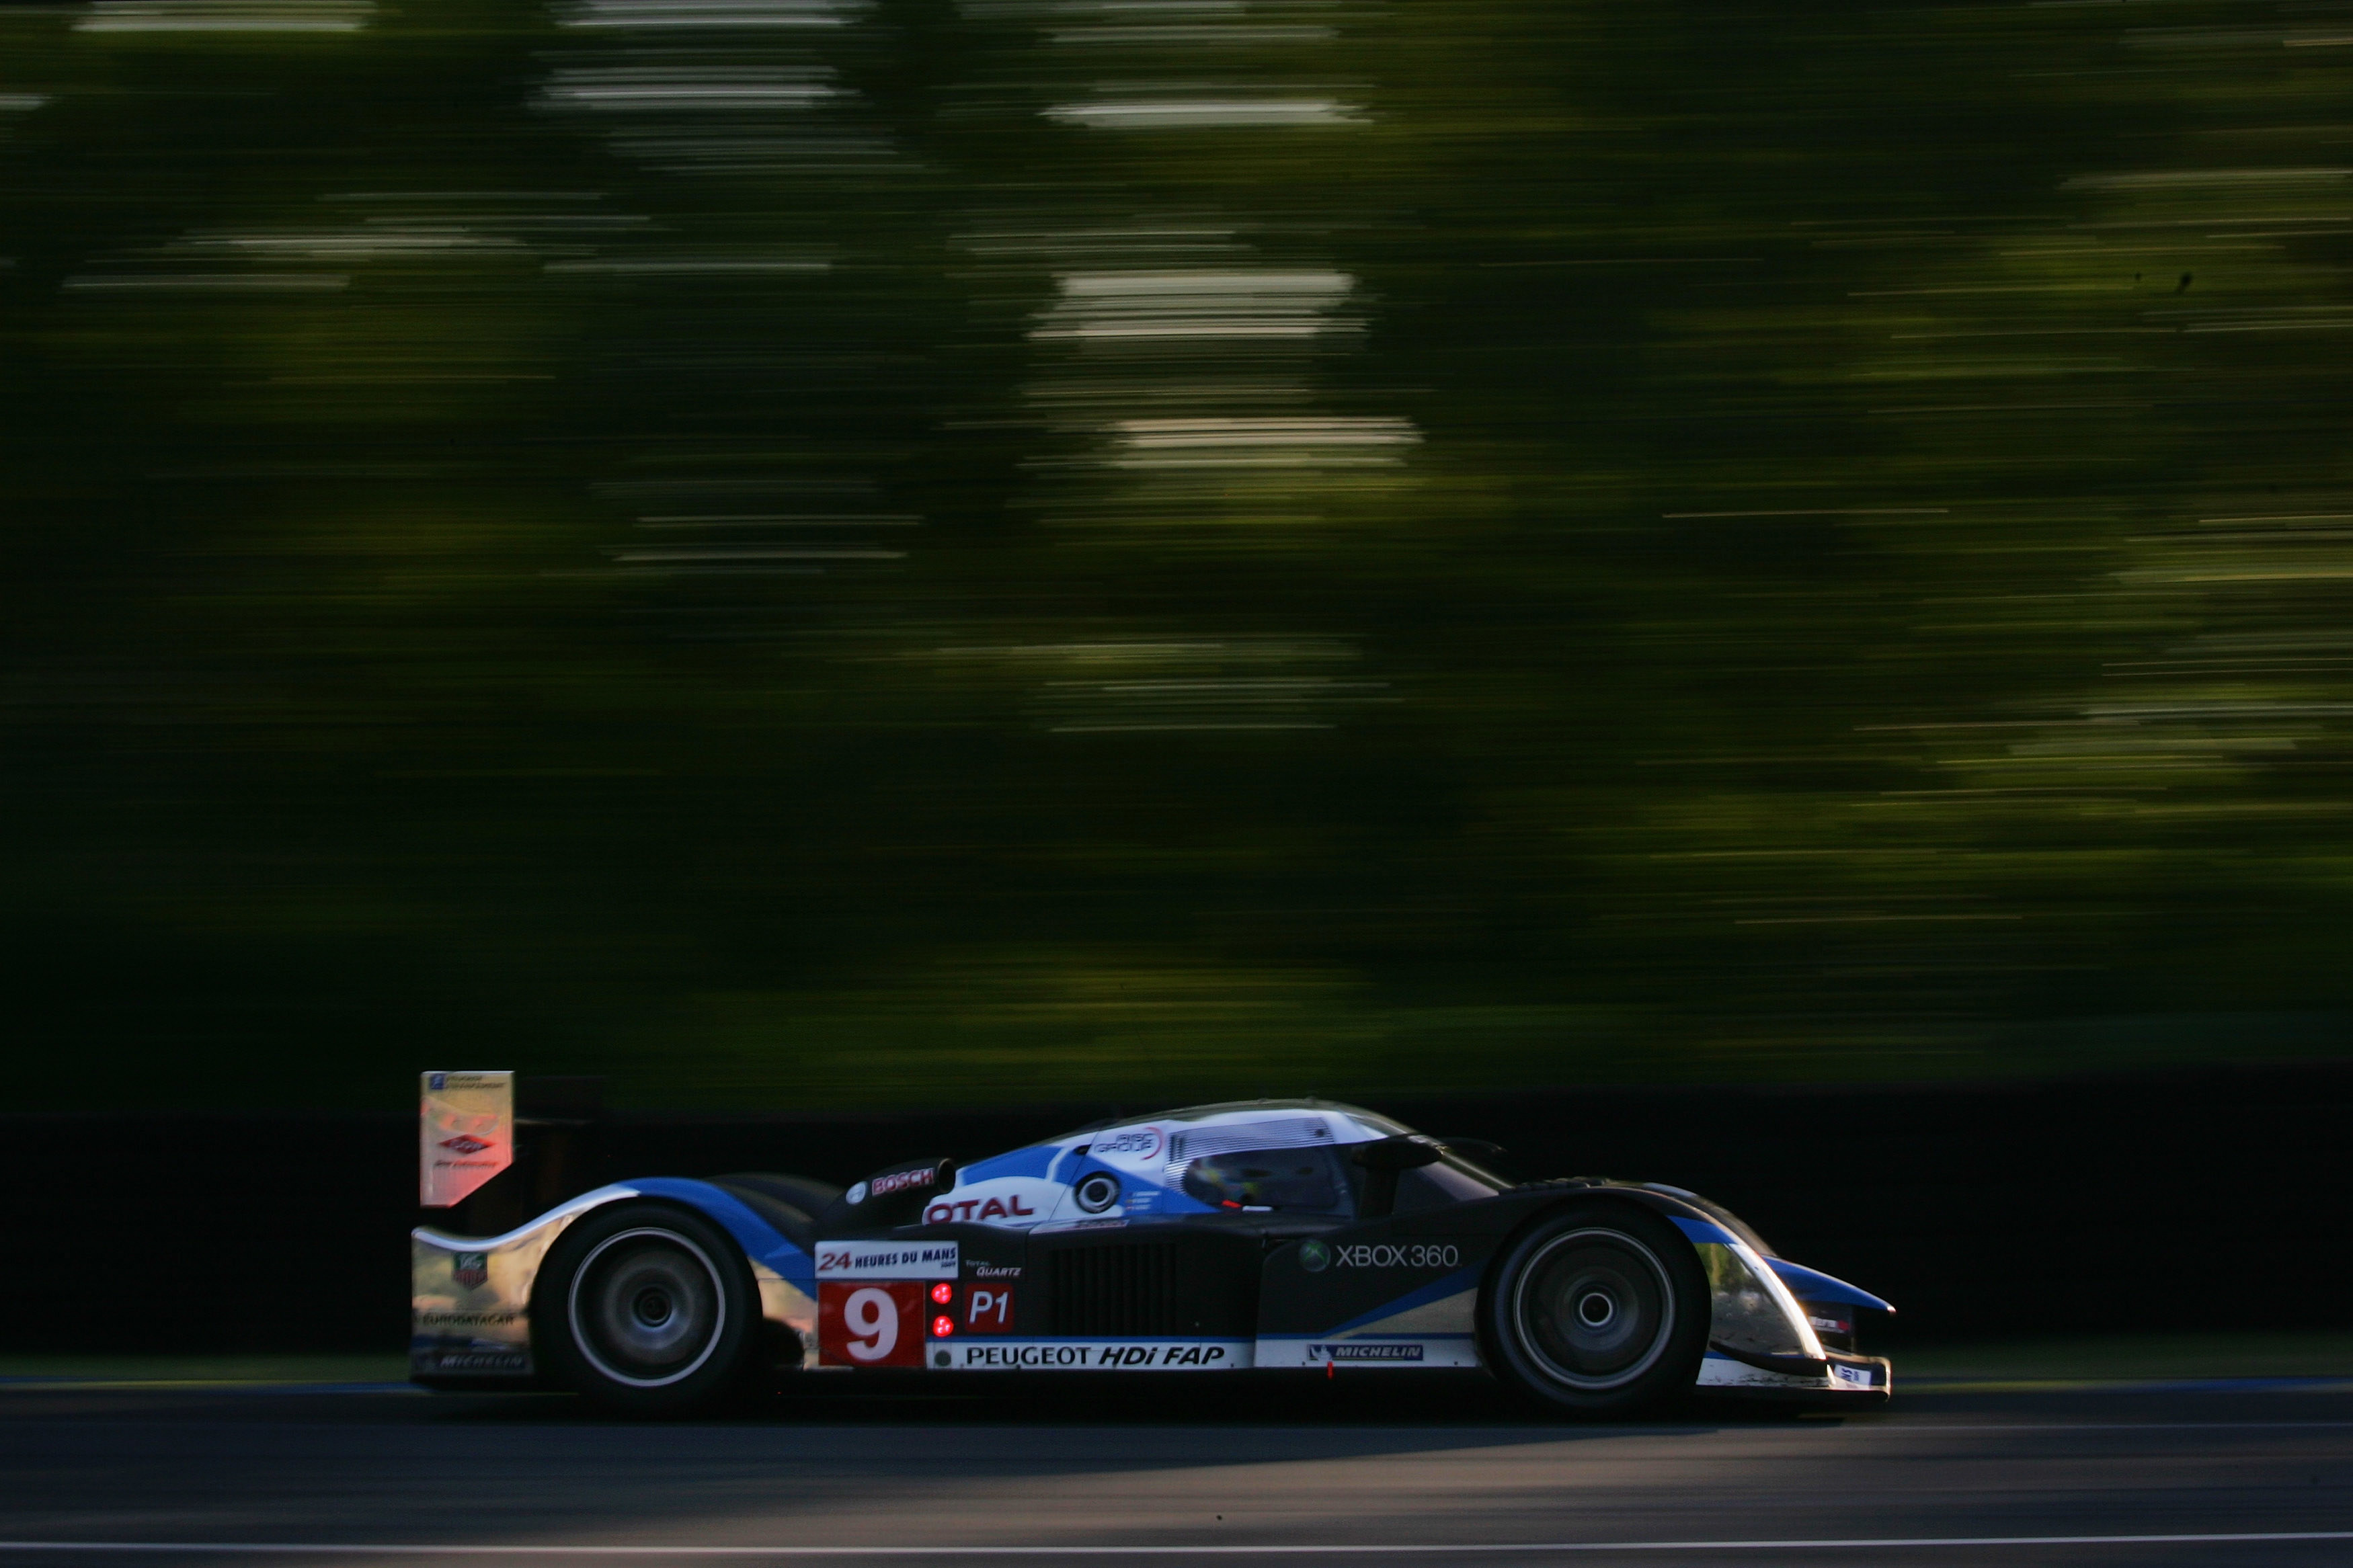 The No.9 Peugeot 908 HDi FAP during the 2009 24 Hours of Le Mans.